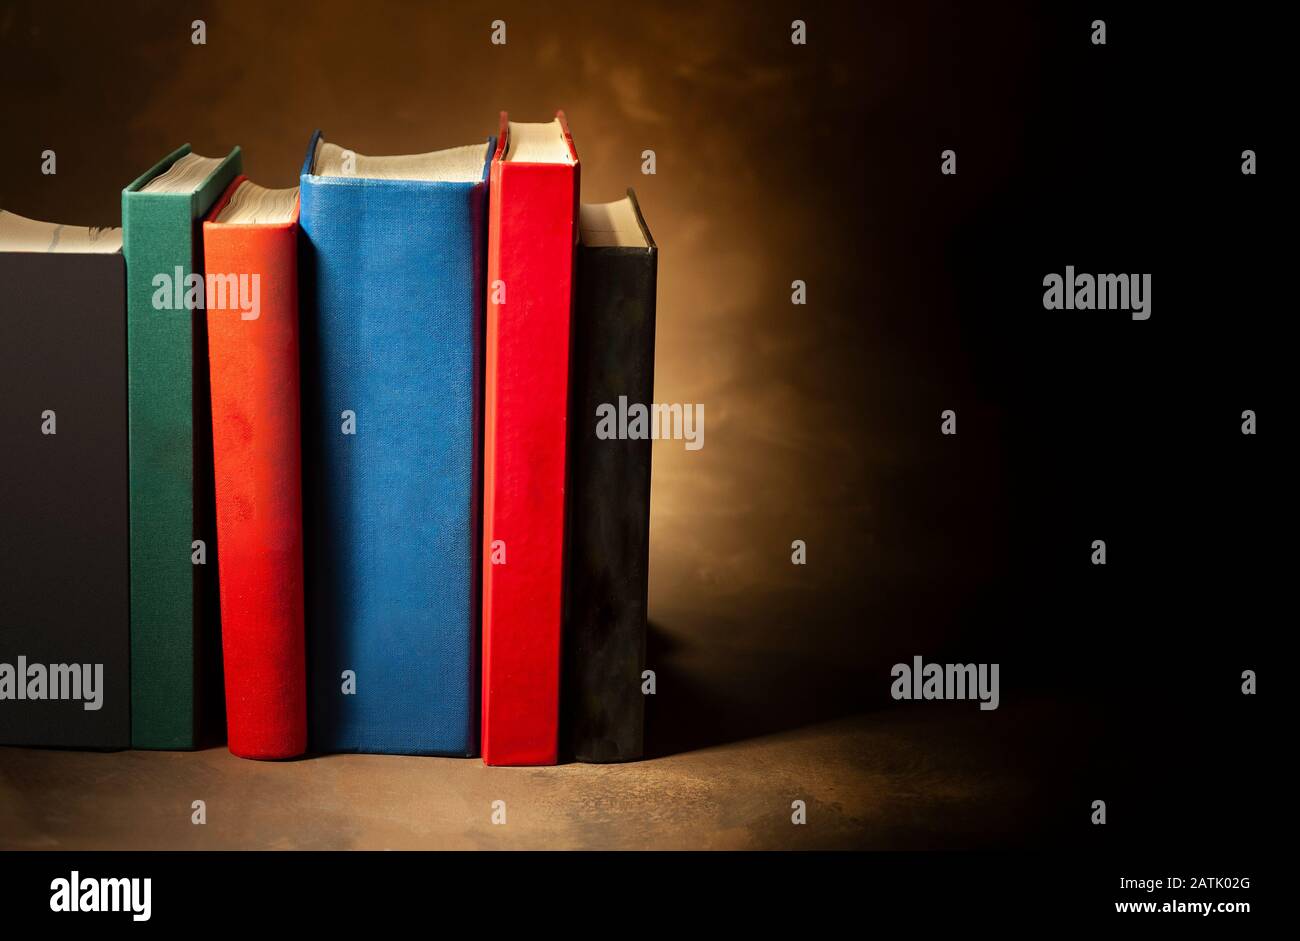 Stack of hardcover books on brown background, space for text on the right Stock Photo